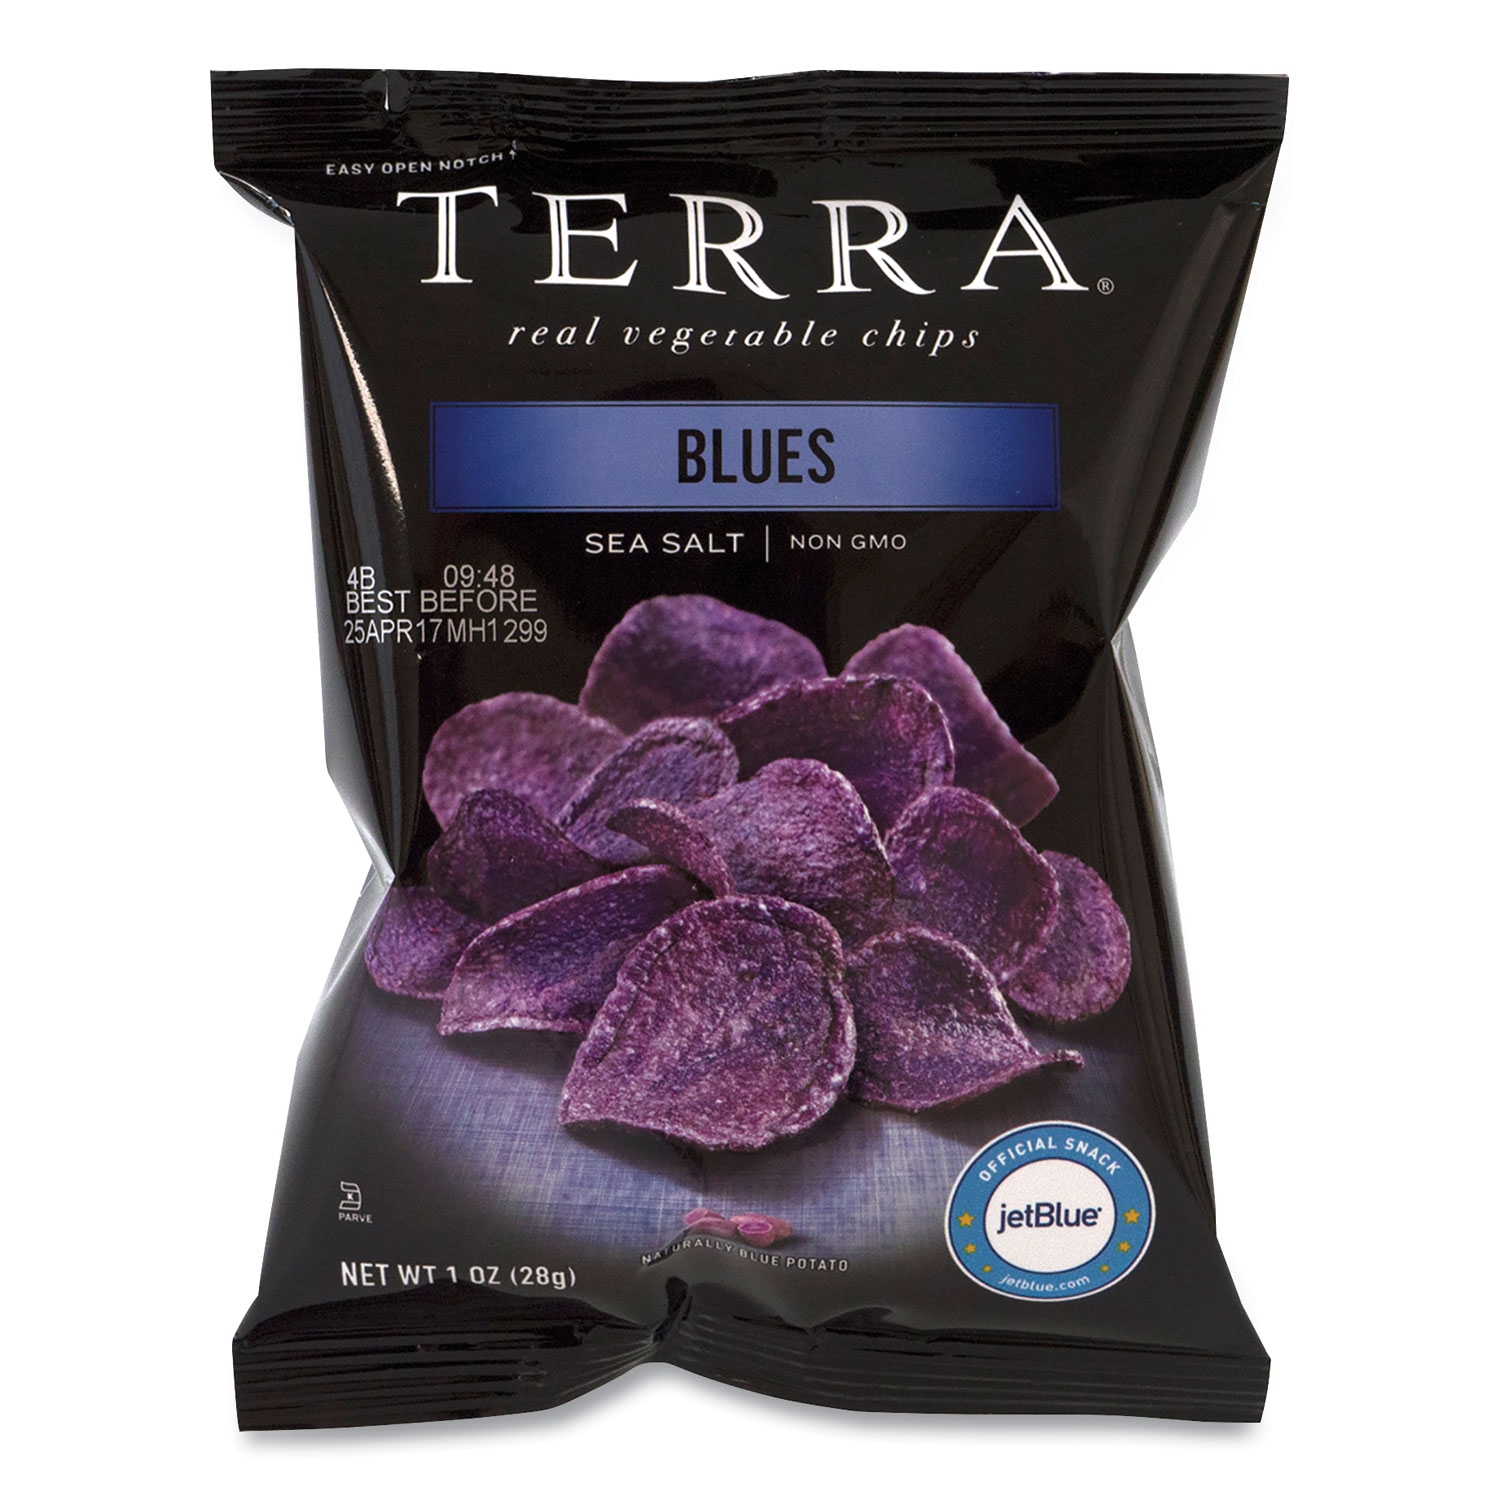 TERRA® Real Vegetable Chips Blue, 1 oz Bag, 24 Bags/Box, Free Delivery in 1-4 Business Days